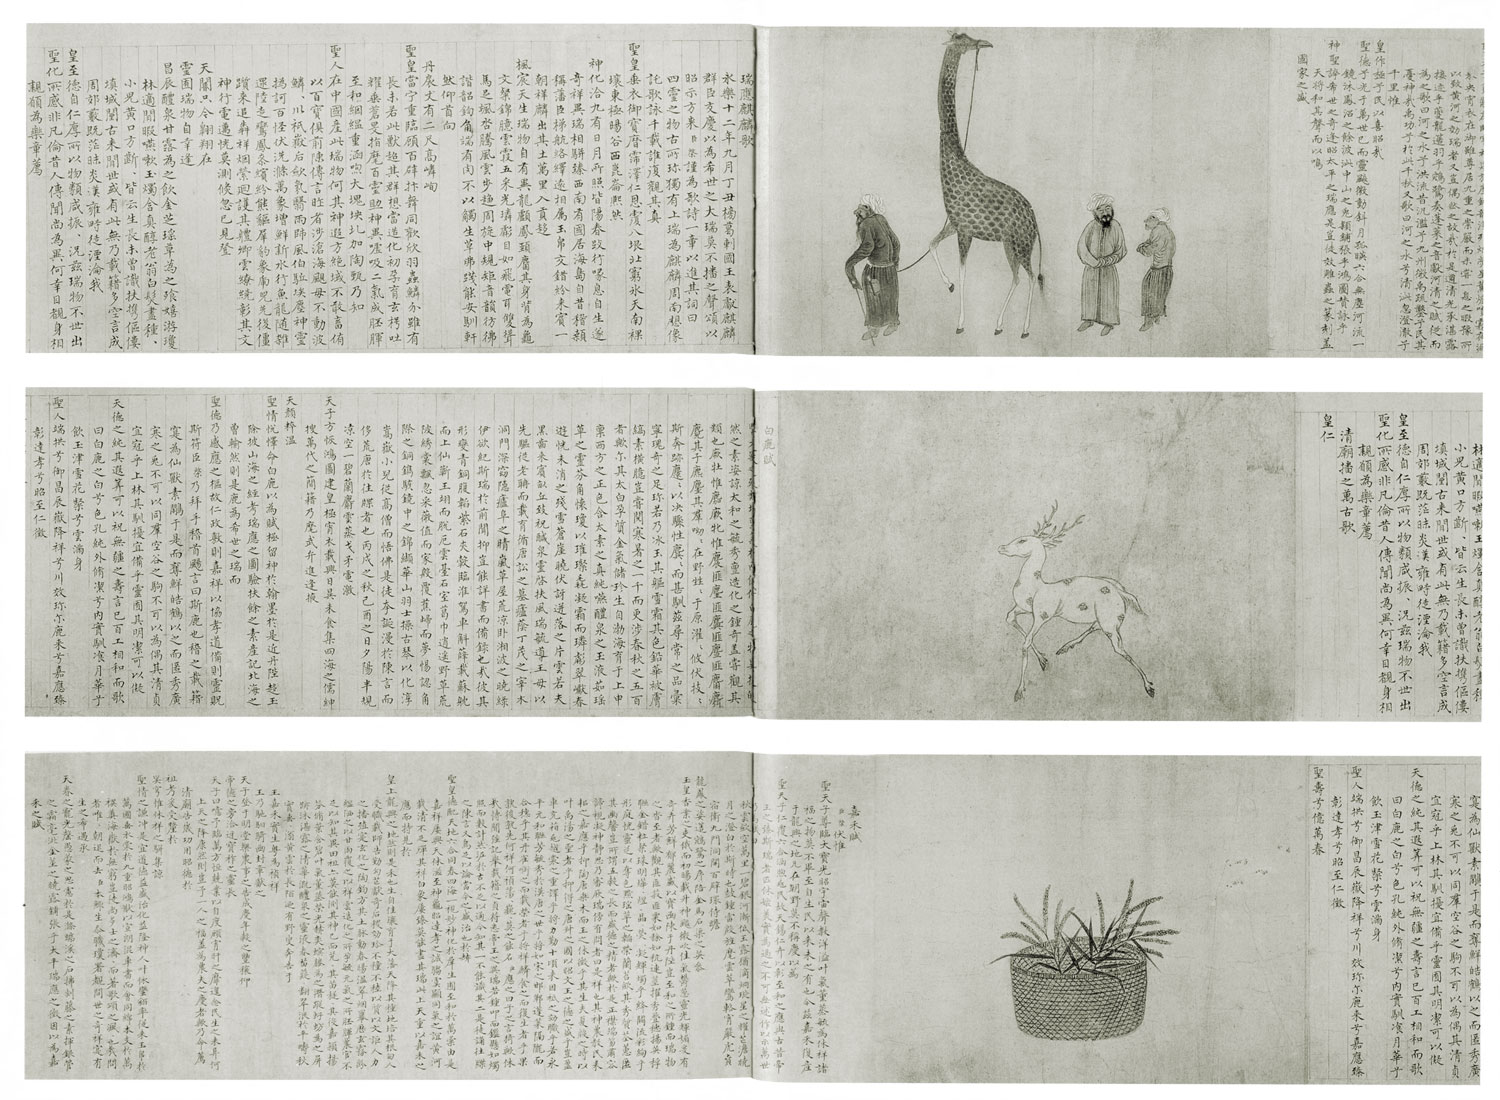 Three spreads from a book: at the top, Chinese text on the left, three men standing, one holding the leash of a giraffe on the right; in the middle, Chinese text on the left, an antelope or deer trotting leftward on the right; at the bottom, Chinese text on the left, a basket of branching stalks, probably some kind of grain, on the right